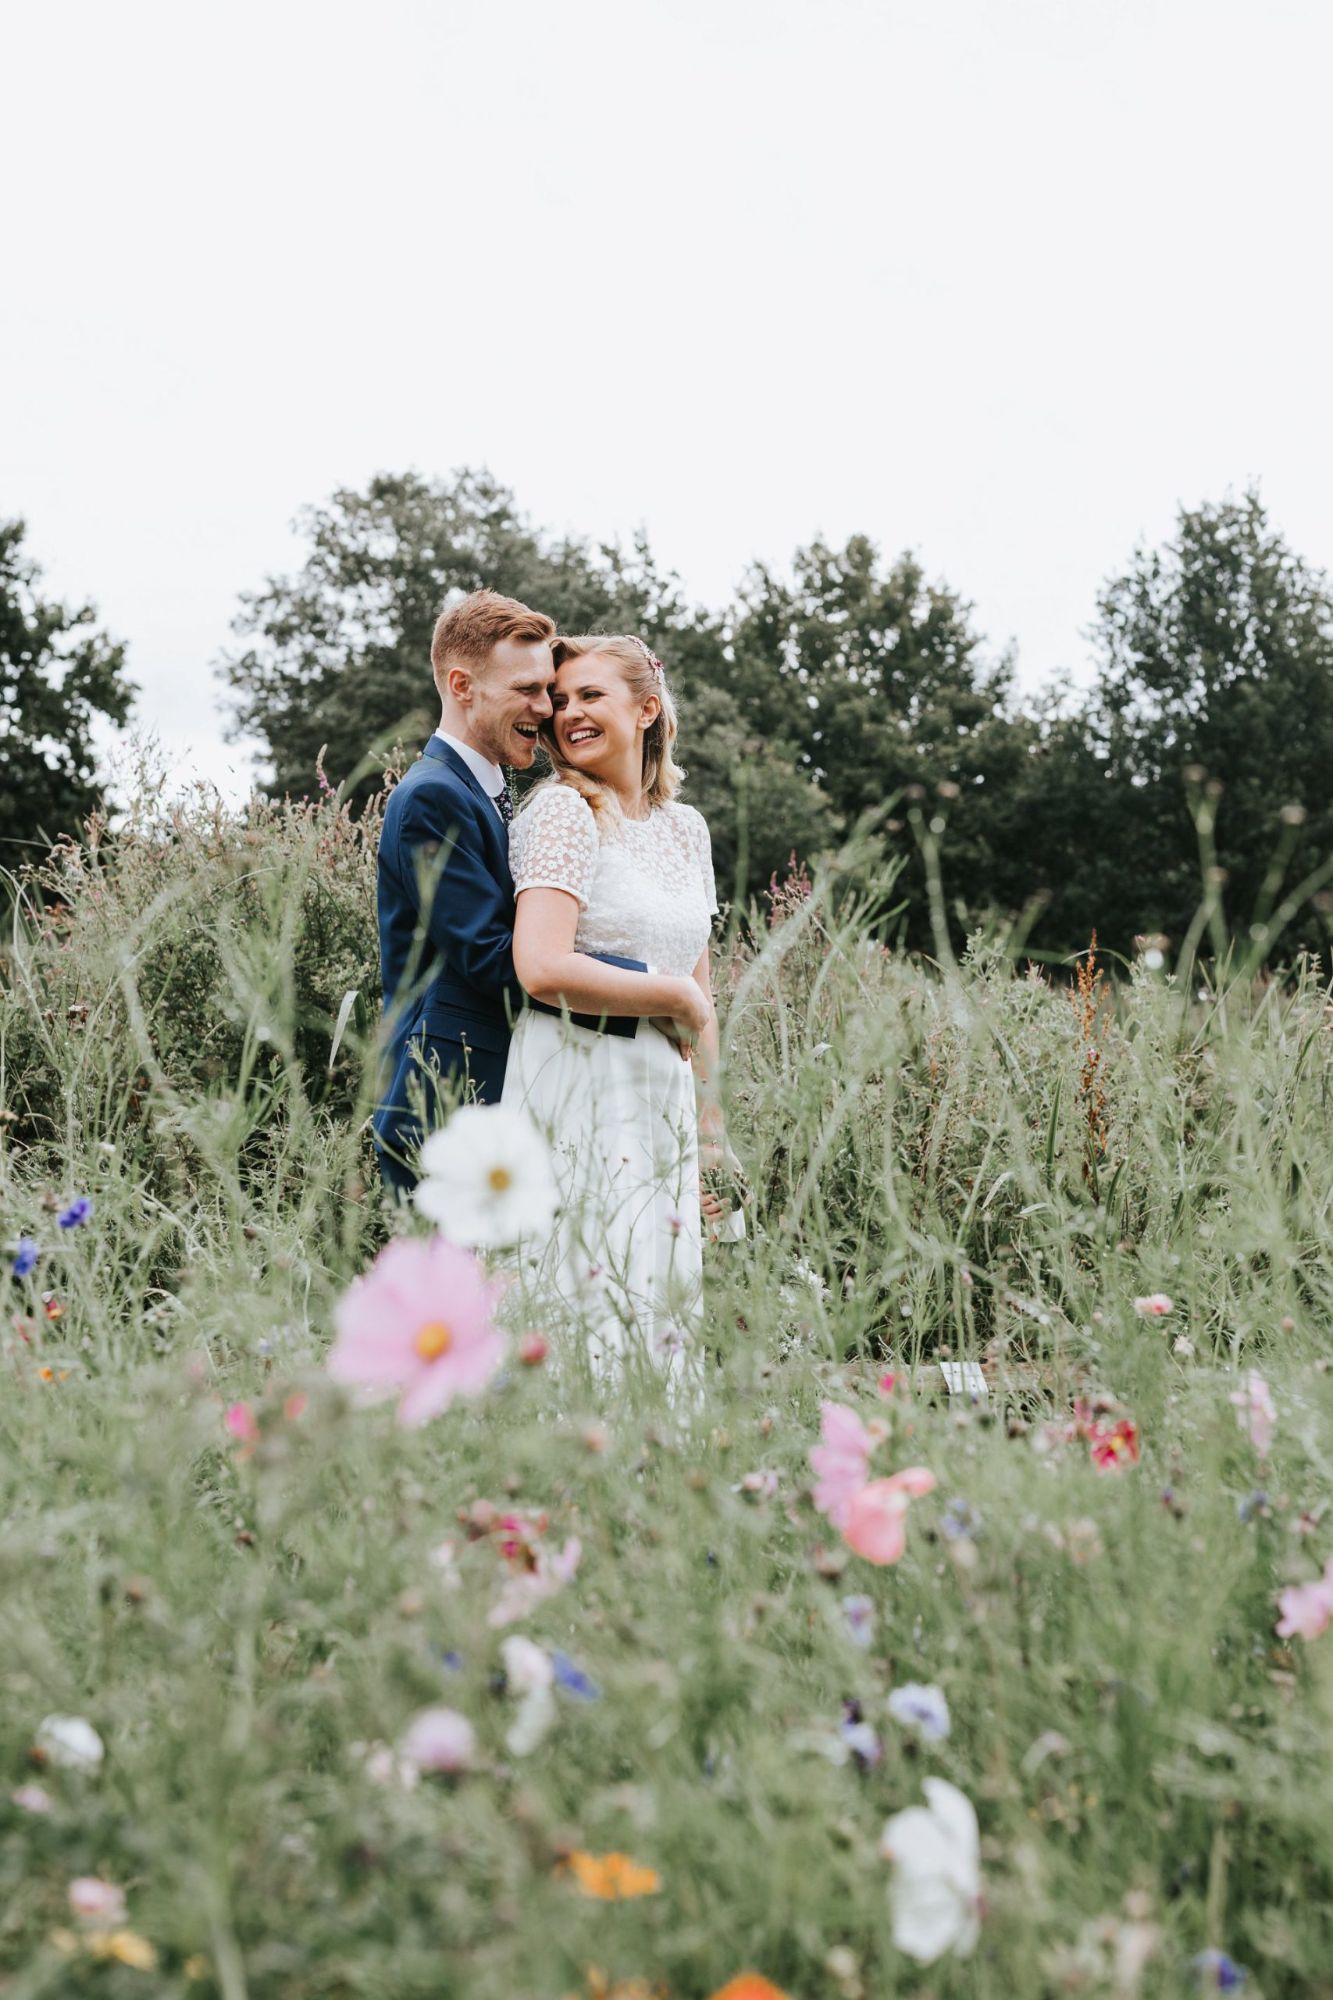 A colourful laid back wedding captured by Fish 2 Photography